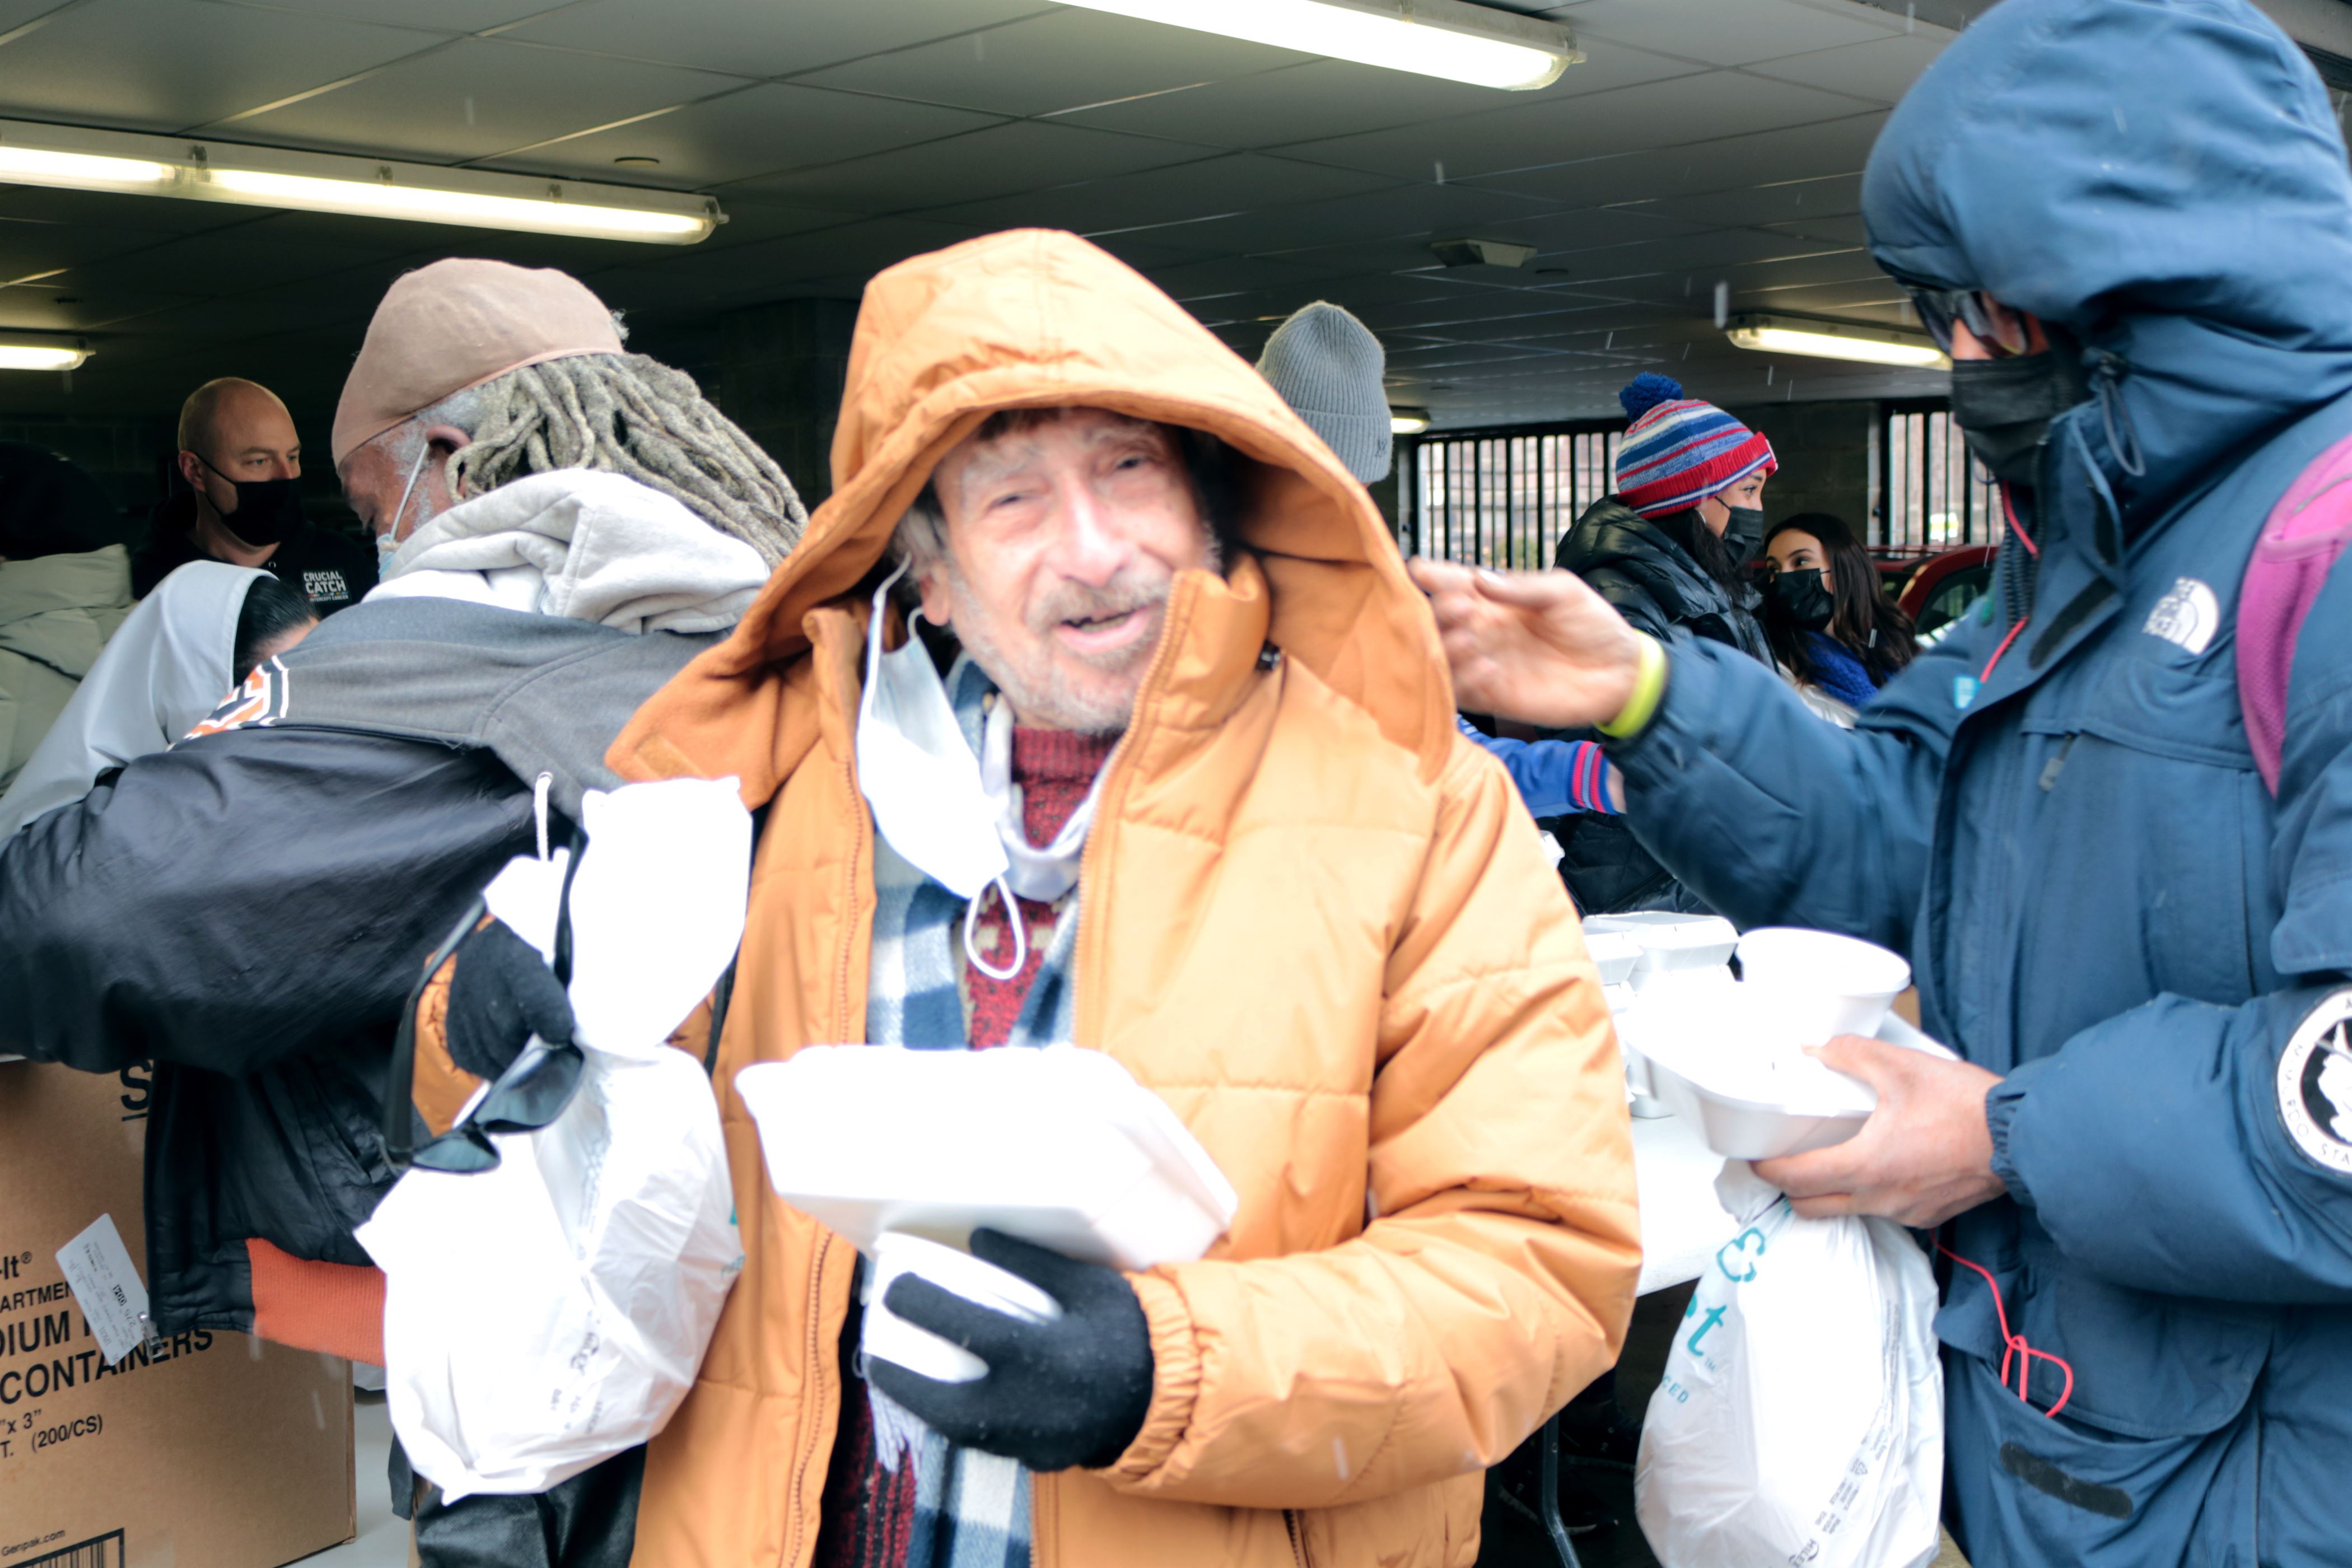 Eric Nunez, a Paterson community member, is benefited by the daily lunch distribution at Eva's Village. Photo courtesy of Monica Fernandez-Prato